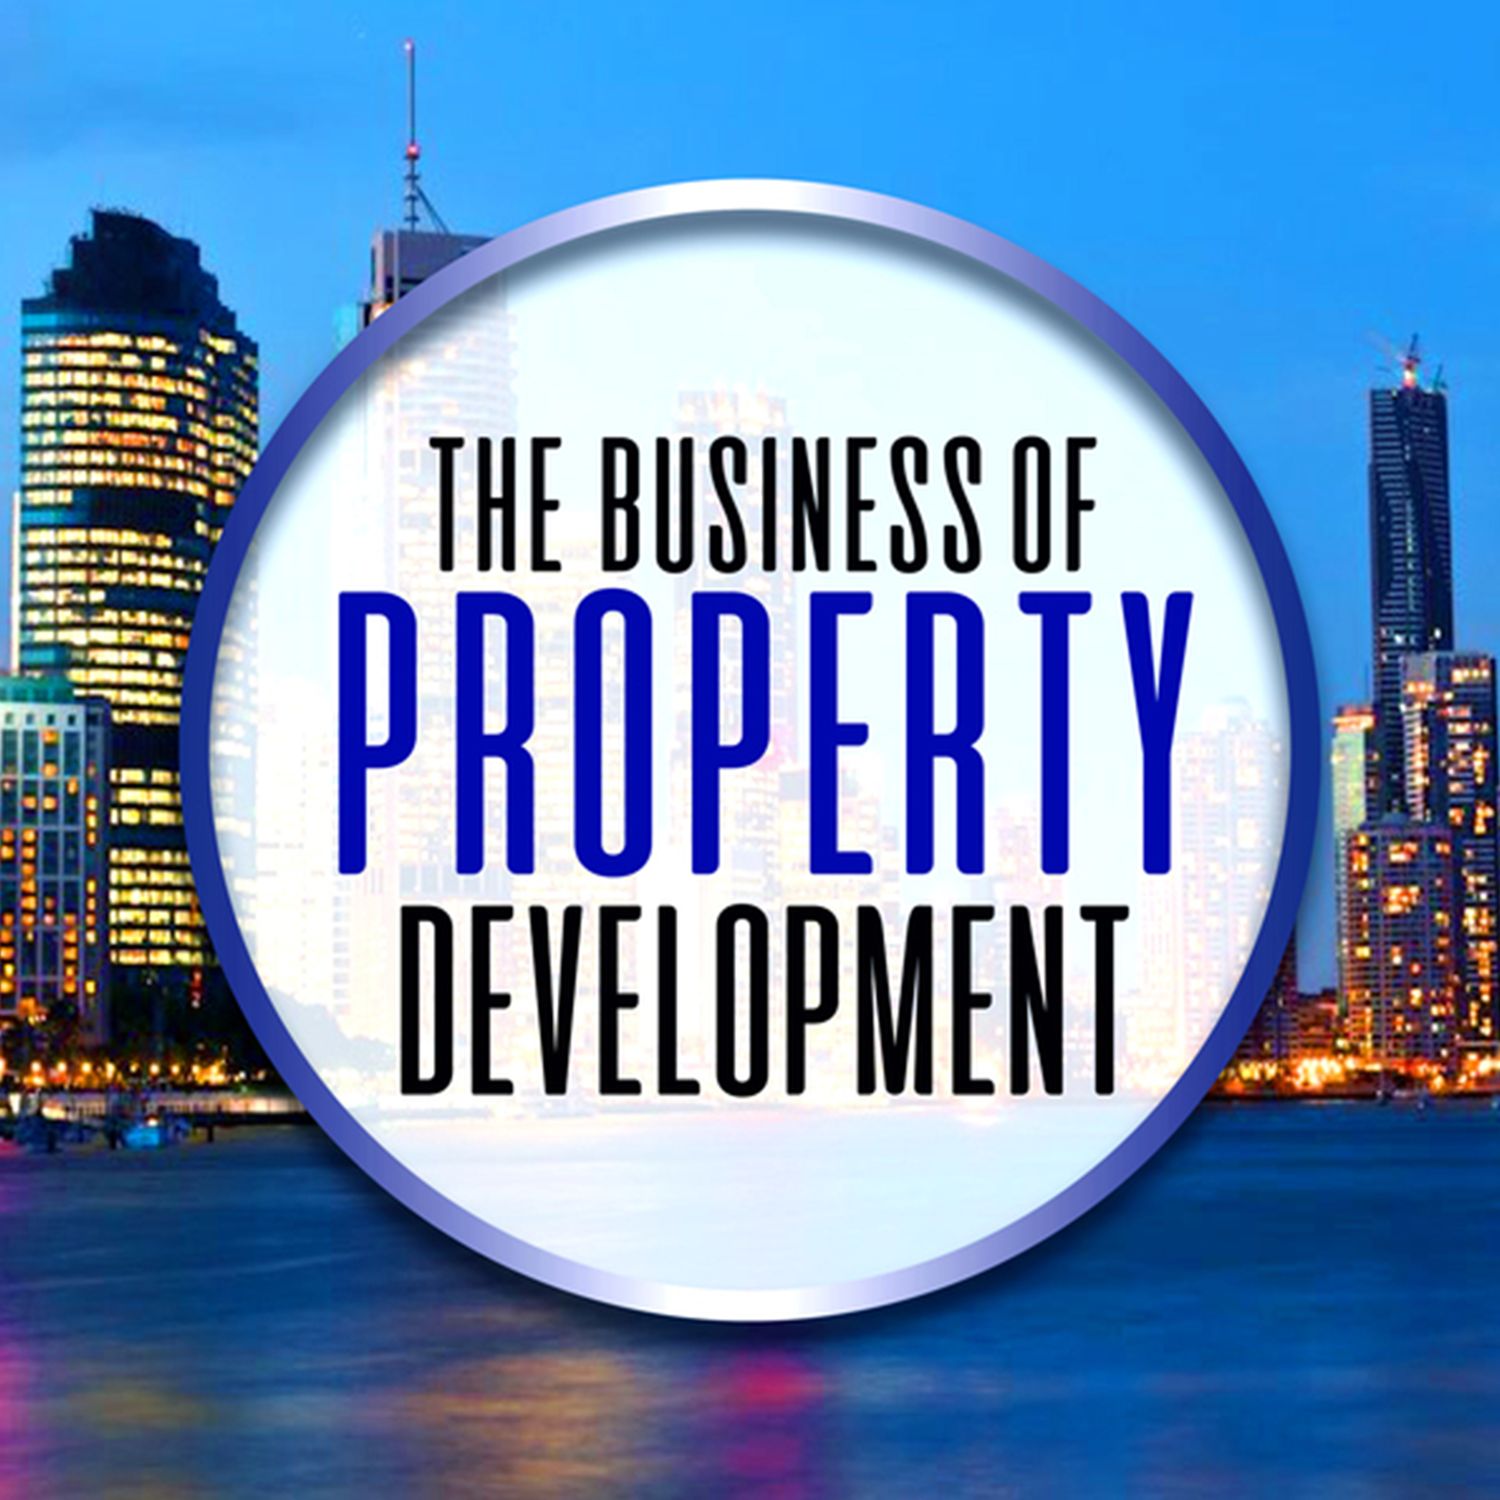 The Business of Property Development